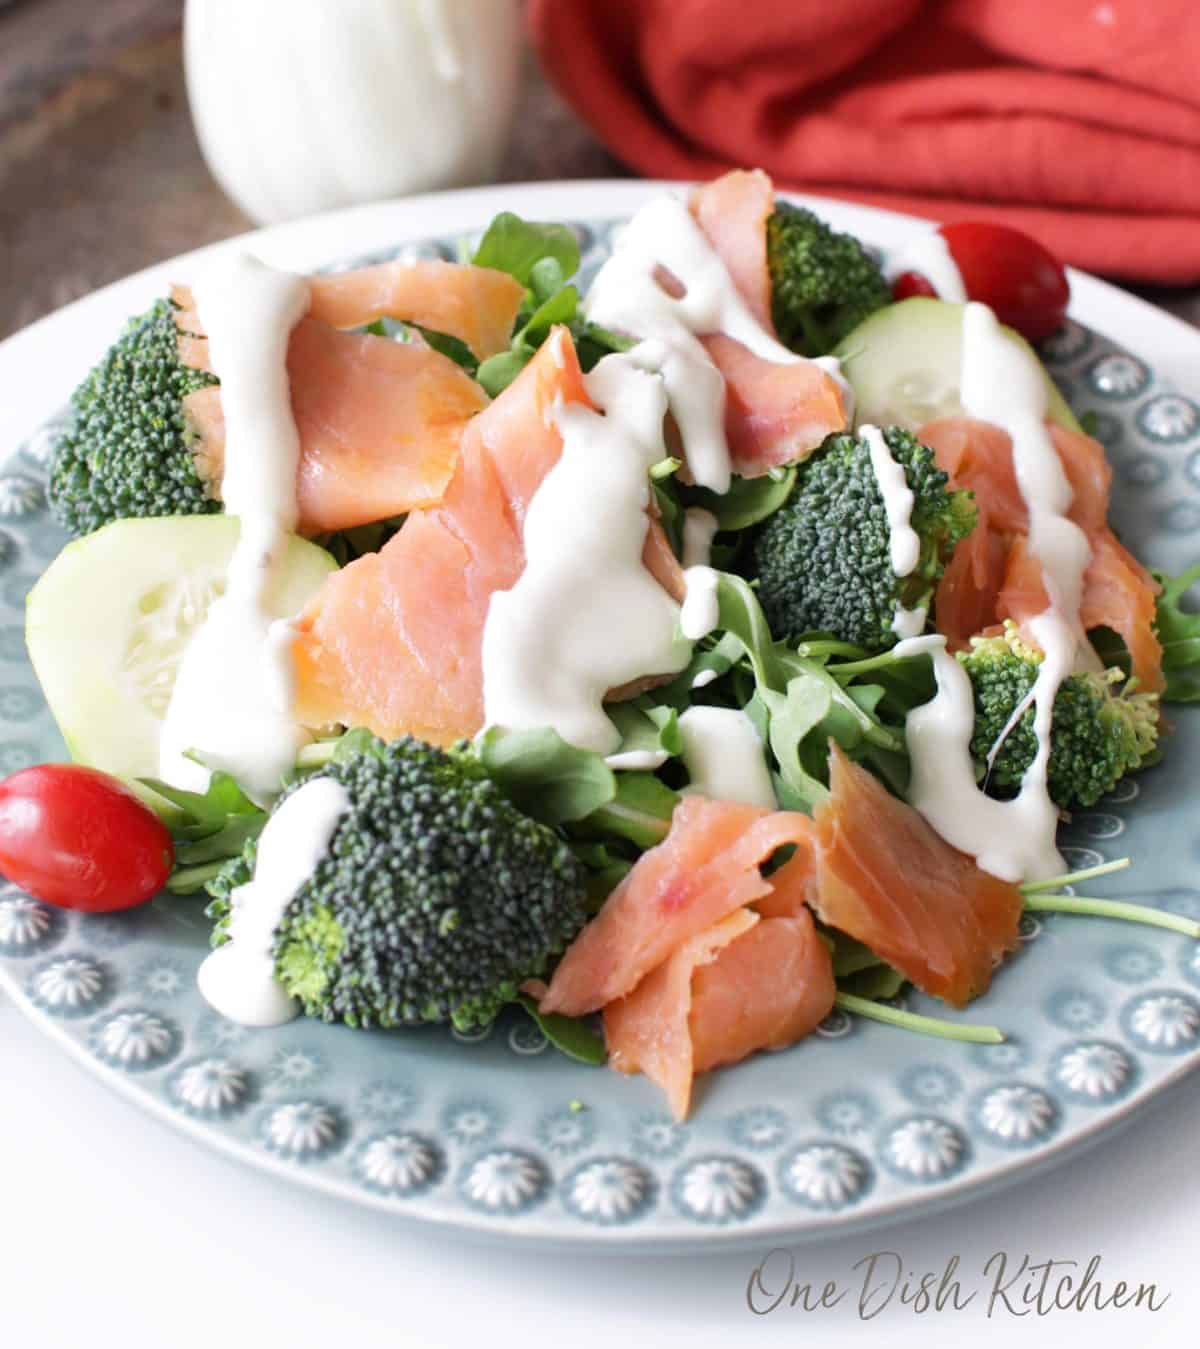 A salad of broccoli florets, smoked salmon, arugula, and cherry tomatoes topped with goat cheese dressing.